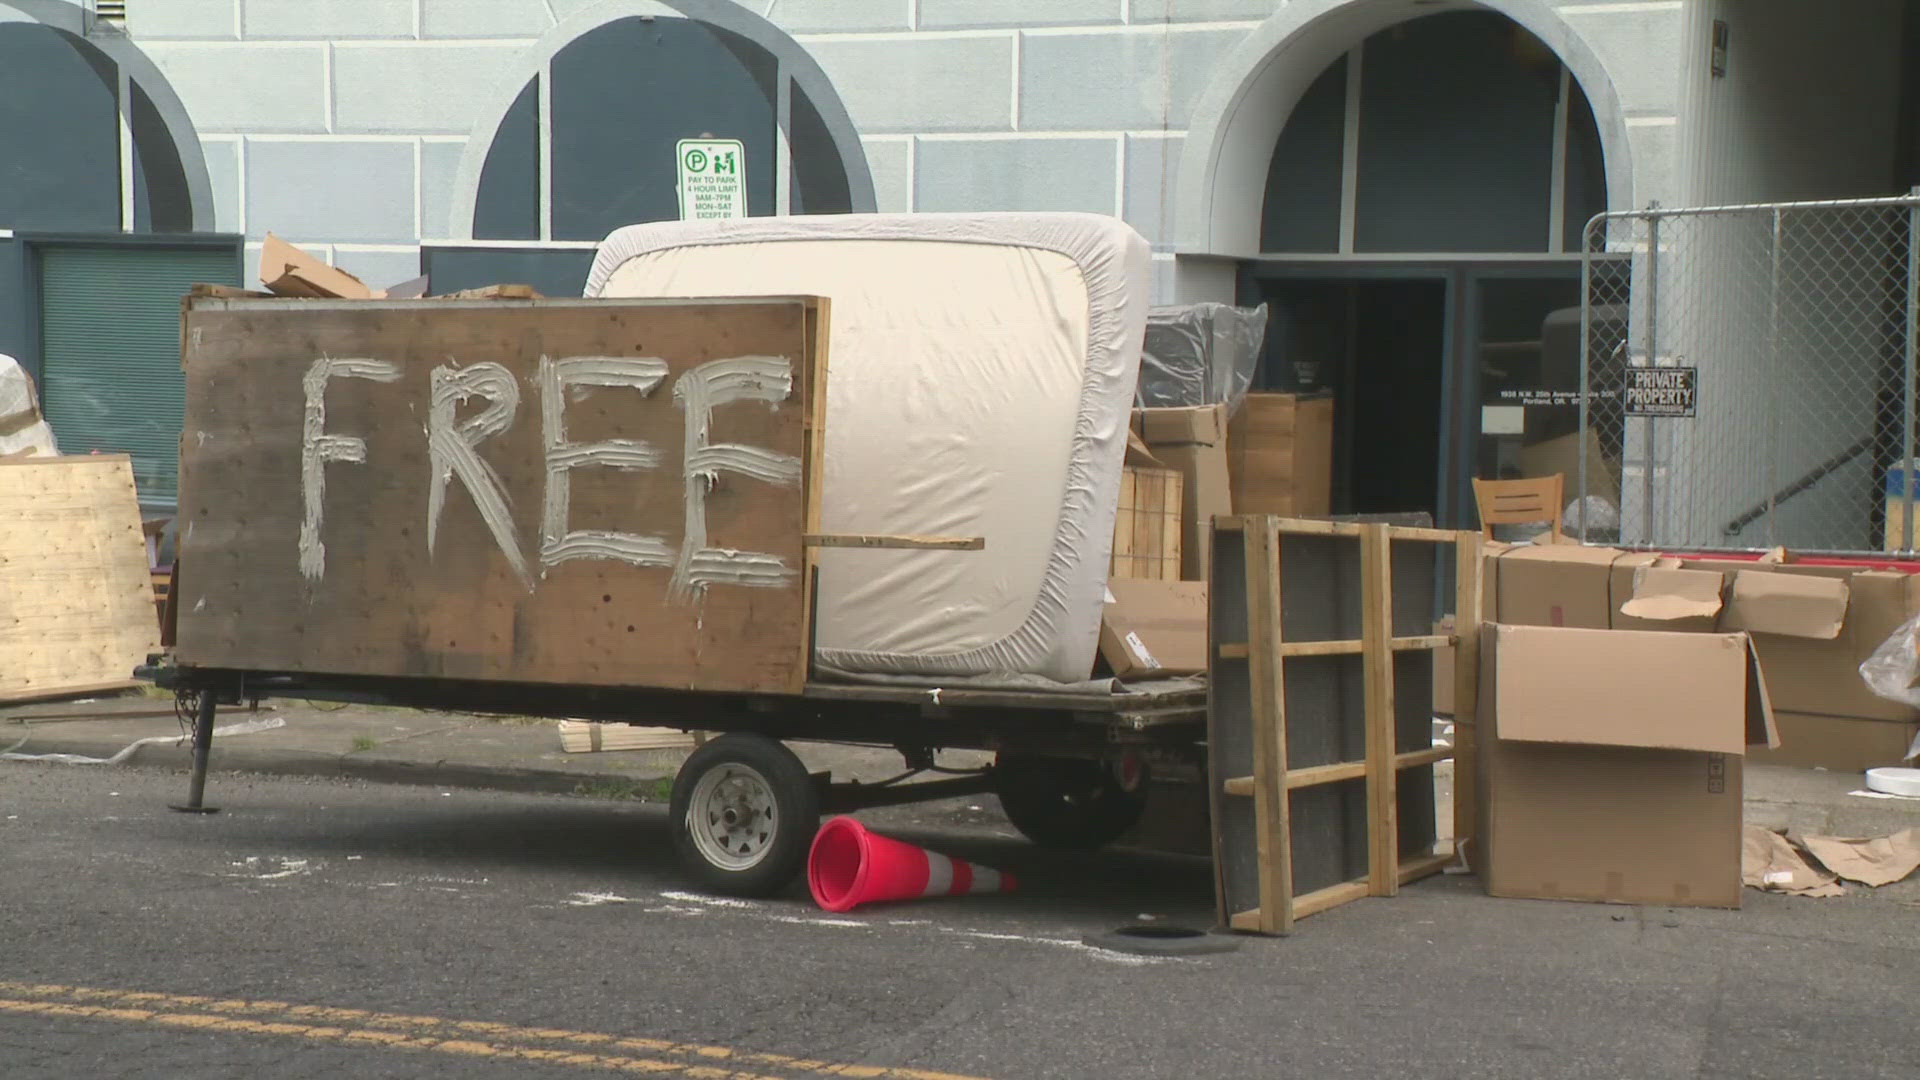 A plywood sign outside a Portland furniture warehouse that said "free" was not put up by the property owner and tricked people into taking items from inside